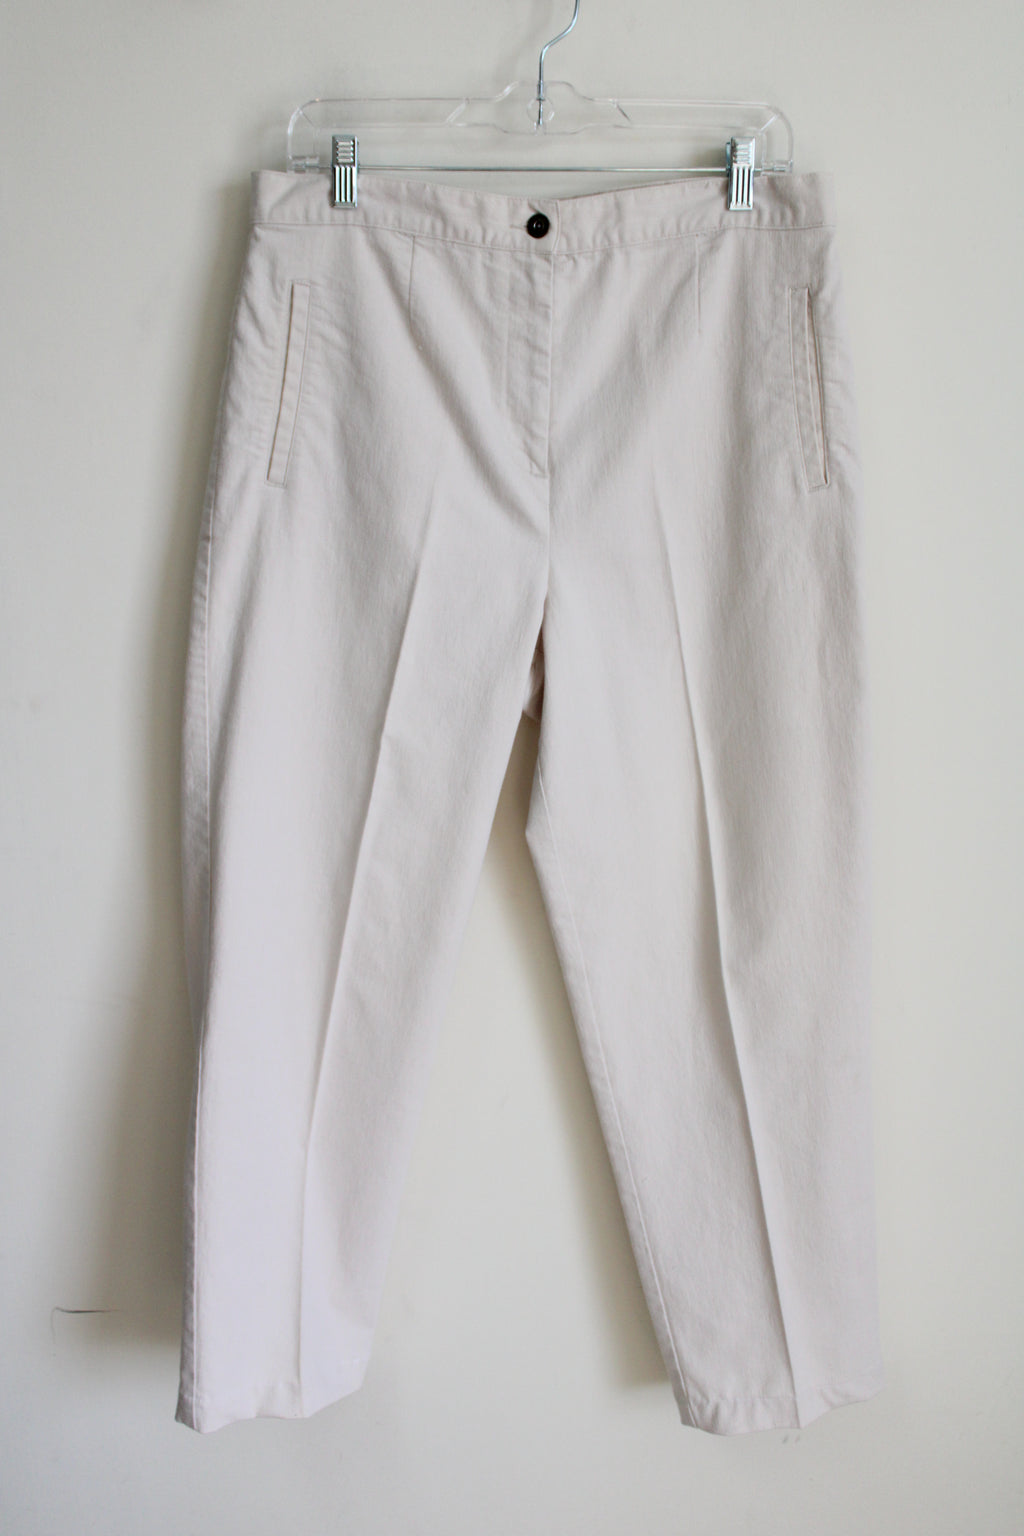 Christopher & Banks Cream Stretch Jeans | 12